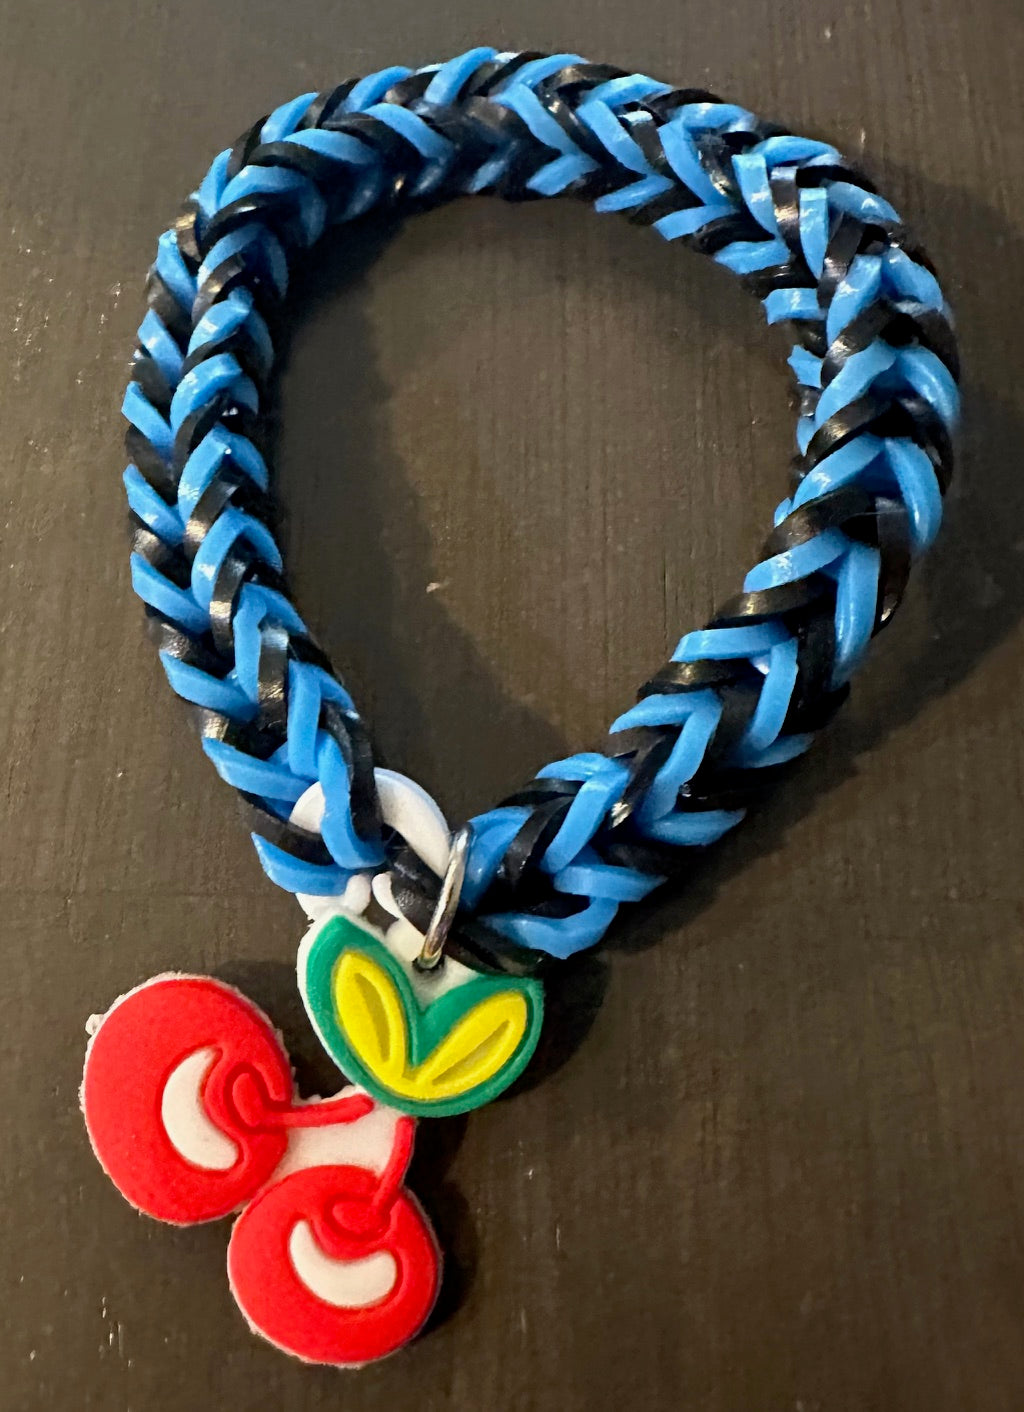 Blue and Black Bracelet with Cherry Charm - Size 6-10